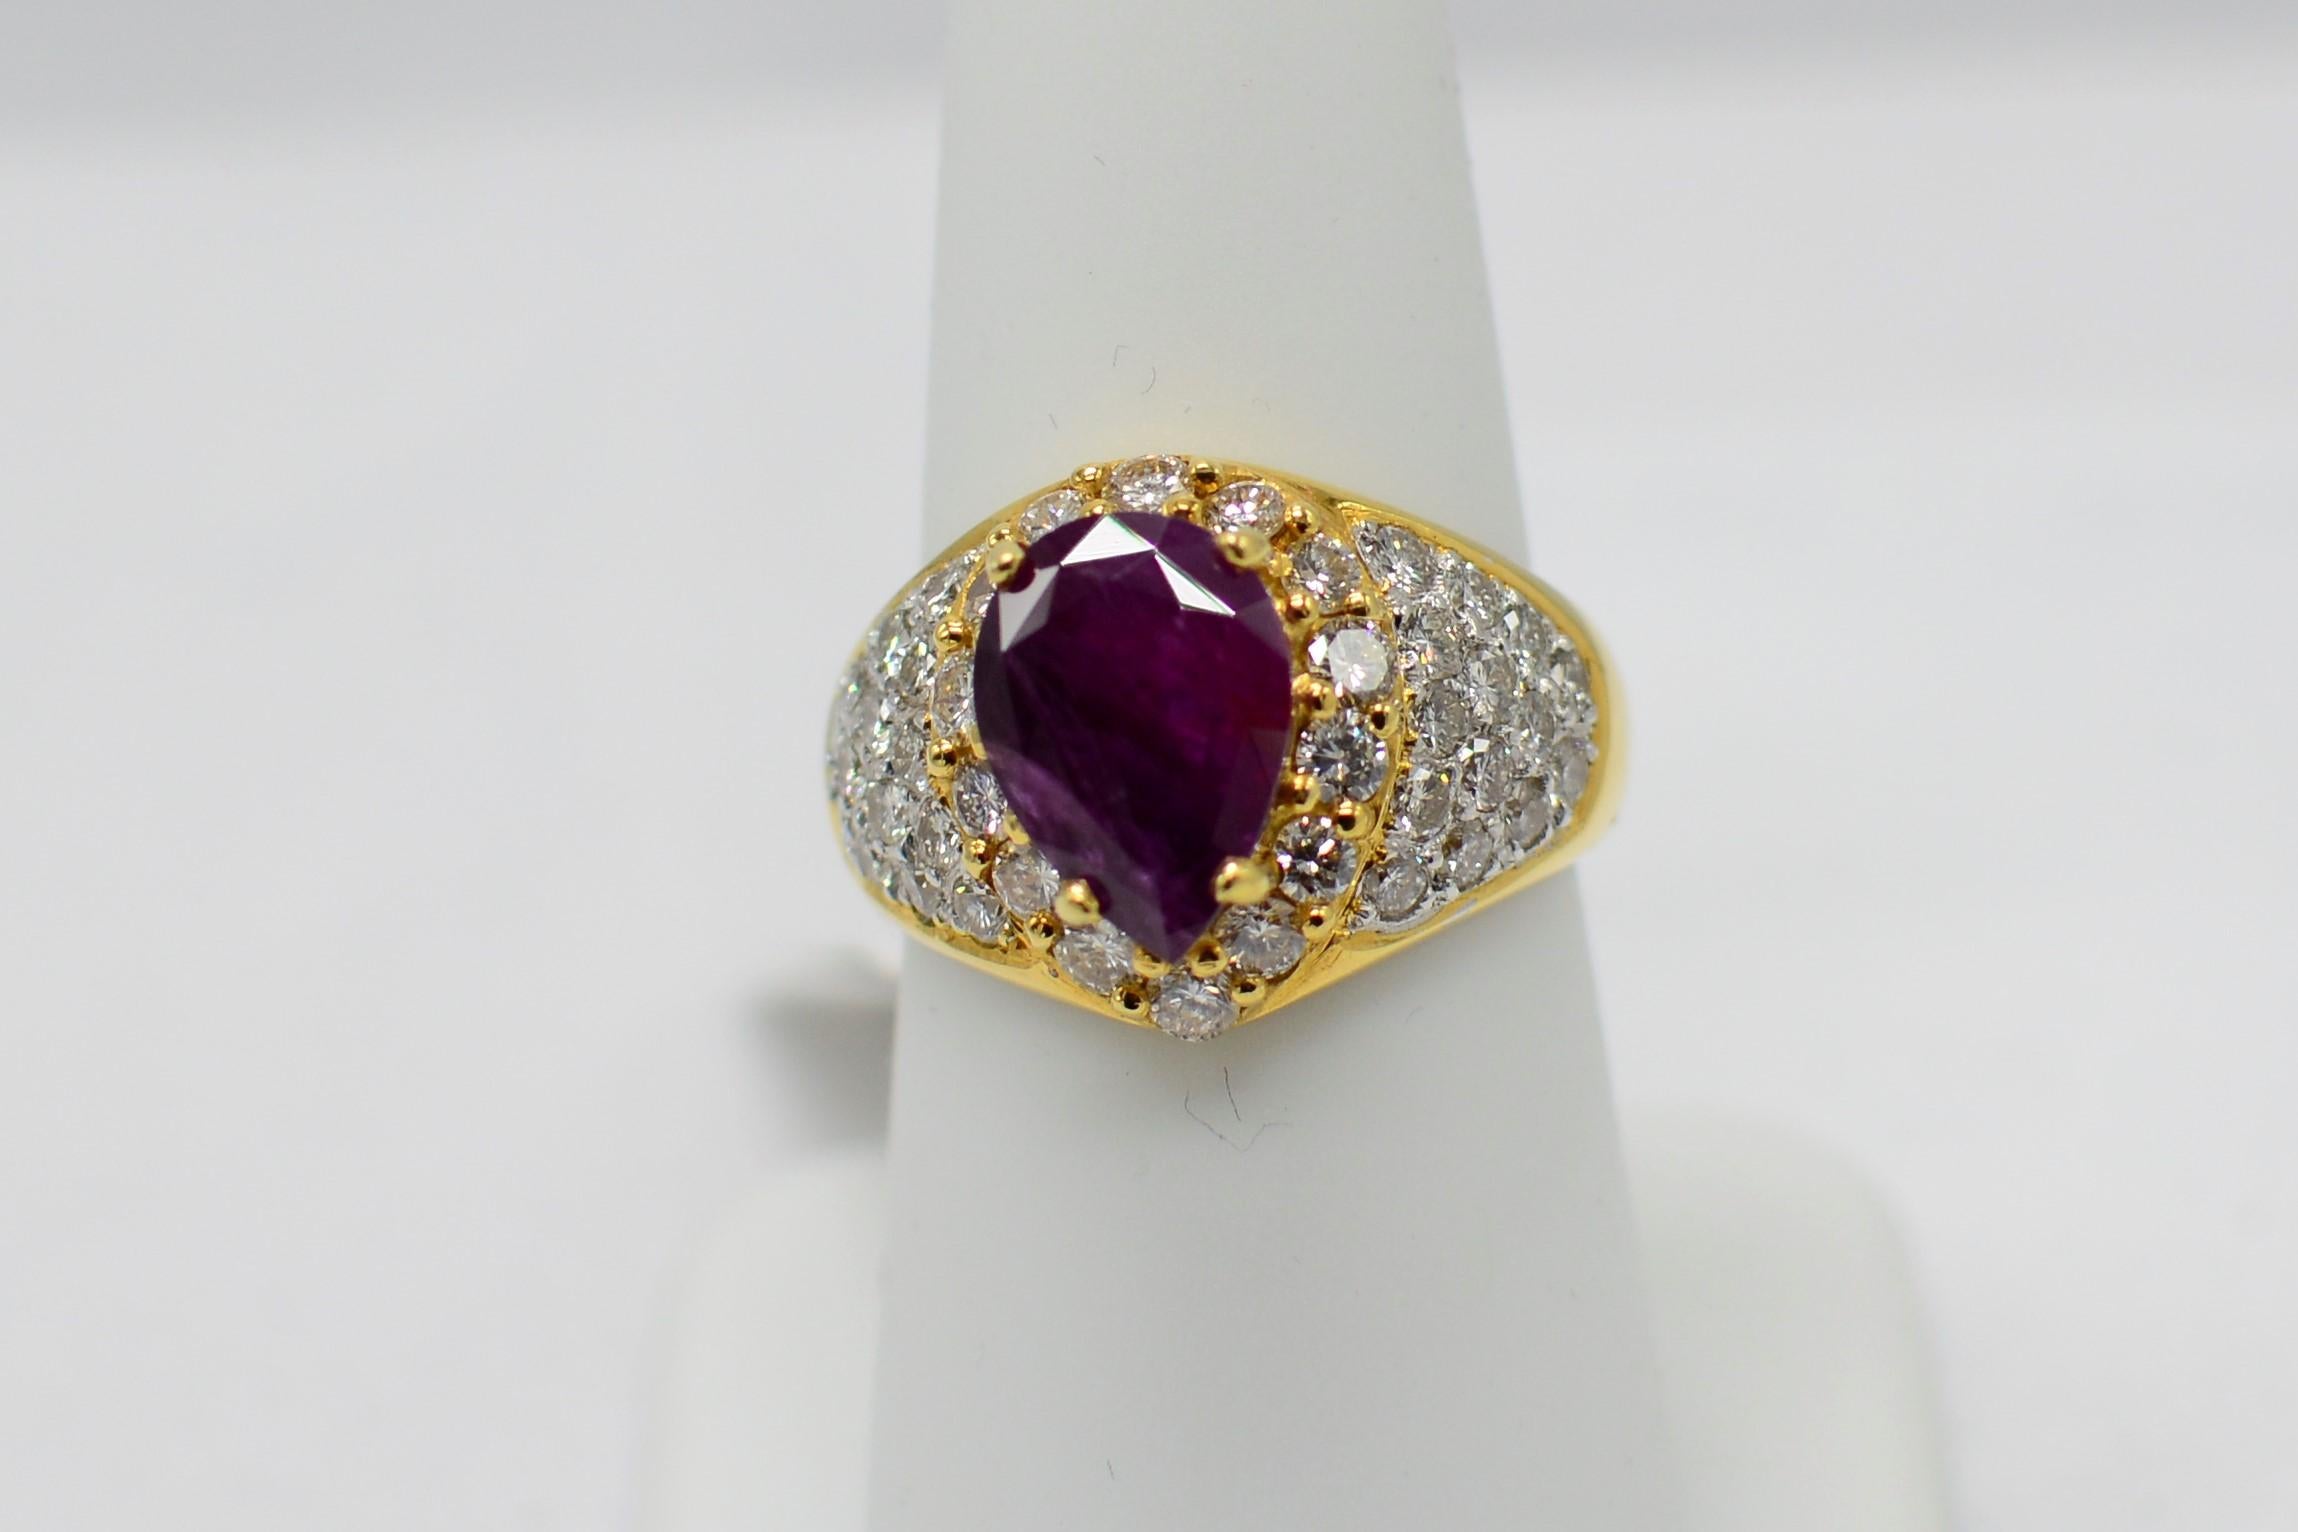 GIA Certified Unheated Natural Ruby Ring.
Ruby weight 3.53 carat, Pear Shape, some visibale inclusion. 
Ruby color  pinkish -red  AA.
Surrounded with nice quality Diamonds 2.0 carat FG-VVS
18k Yellow gold 7.0 grams
Finger size - 7